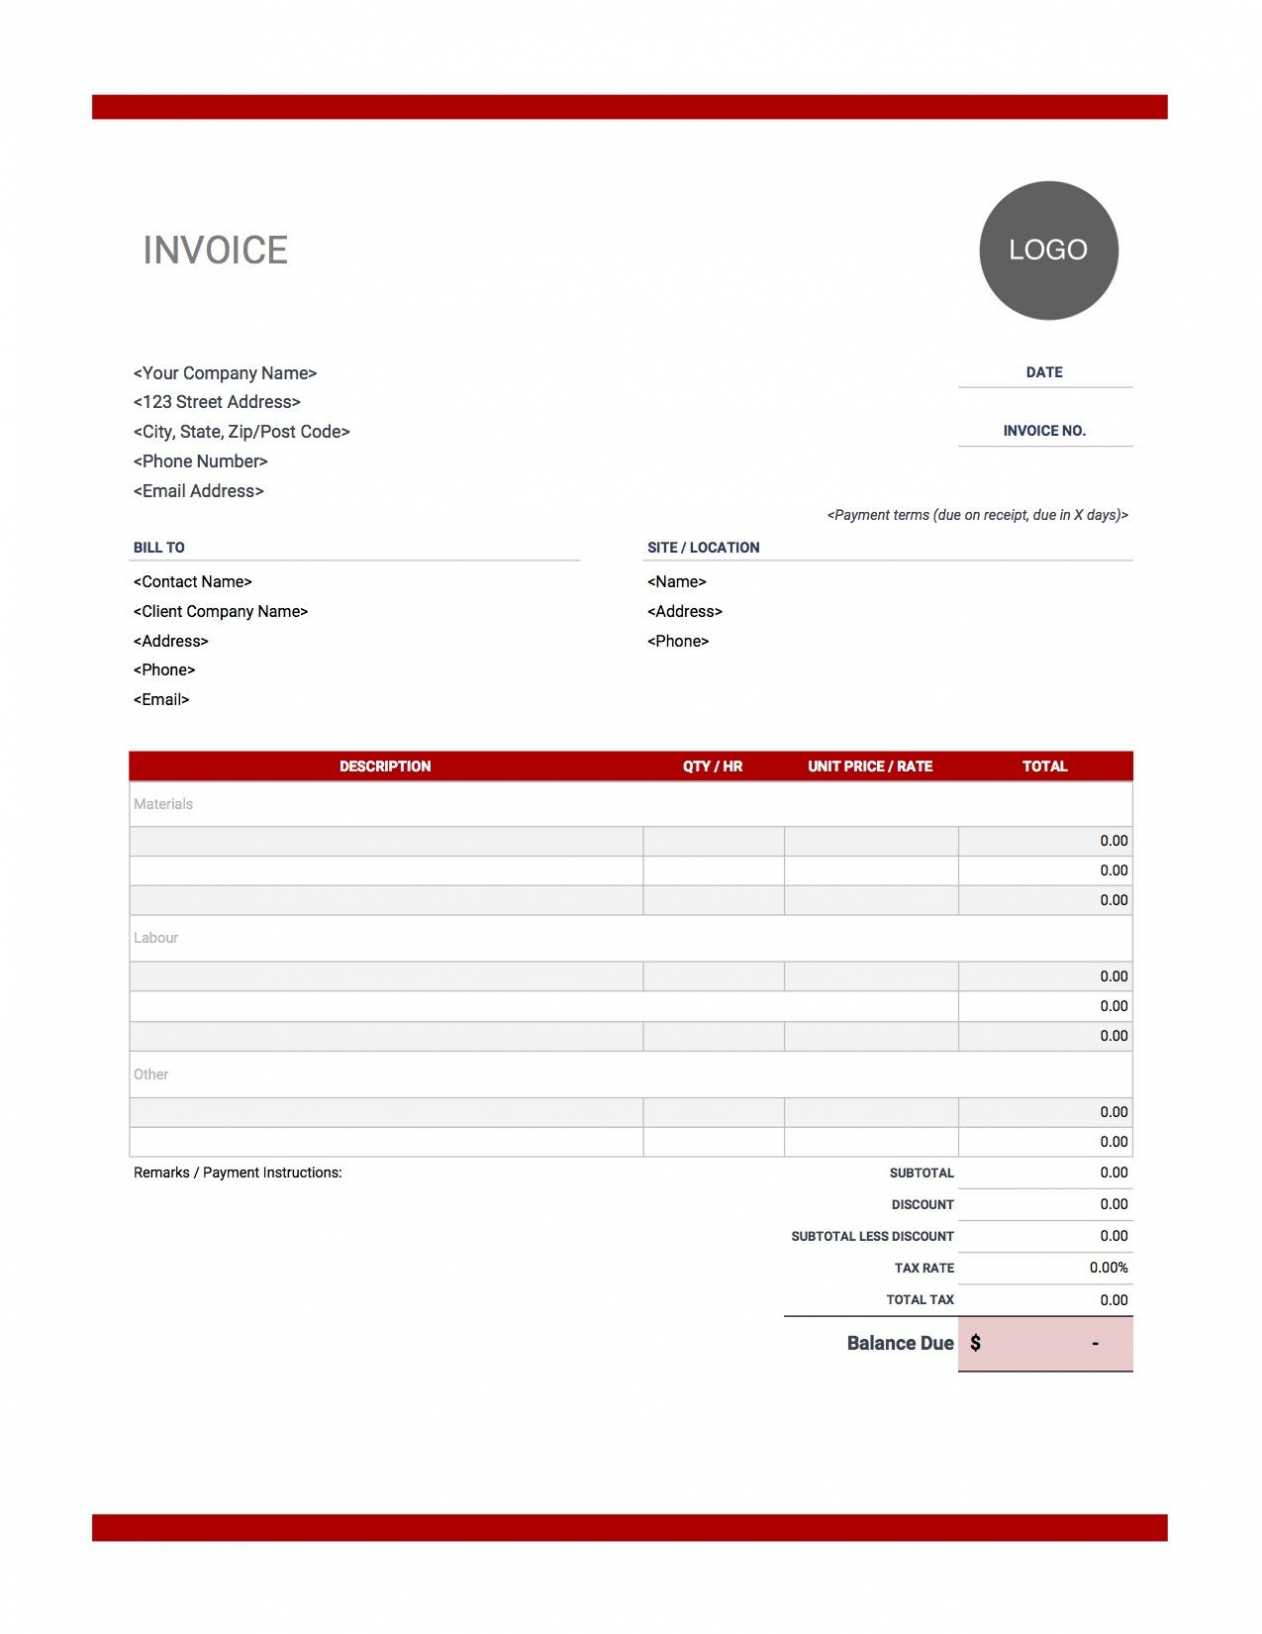 Contractor Invoice Templates | Free Download | Invoice Simple in Contractors Invoices Free Templates